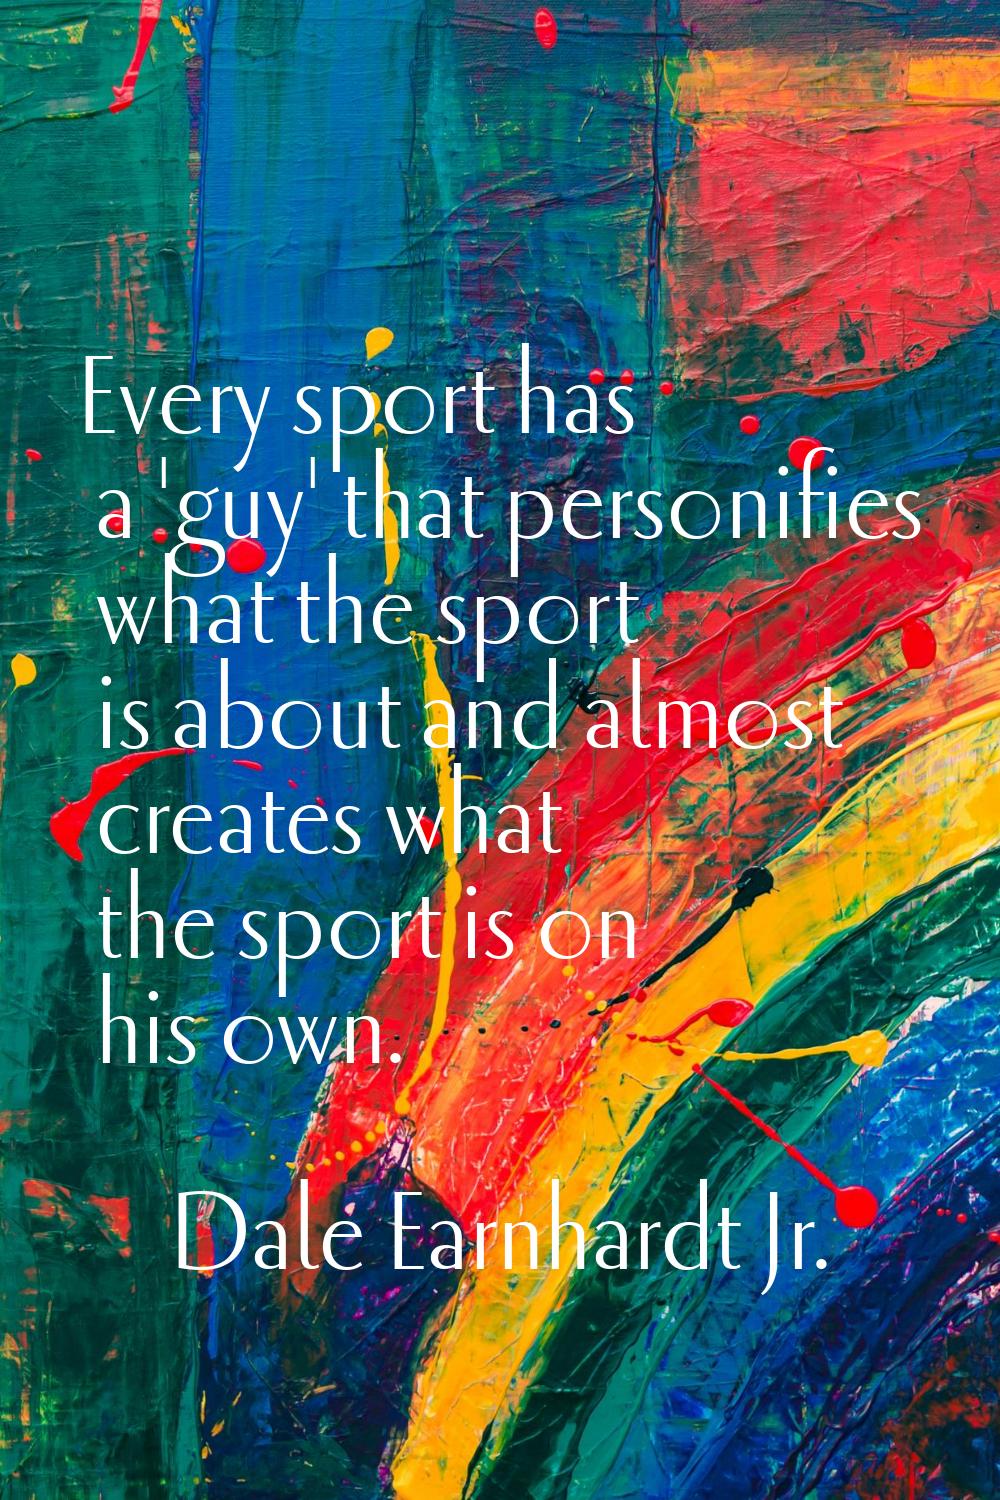 Every sport has a 'guy' that personifies what the sport is about and almost creates what the sport 